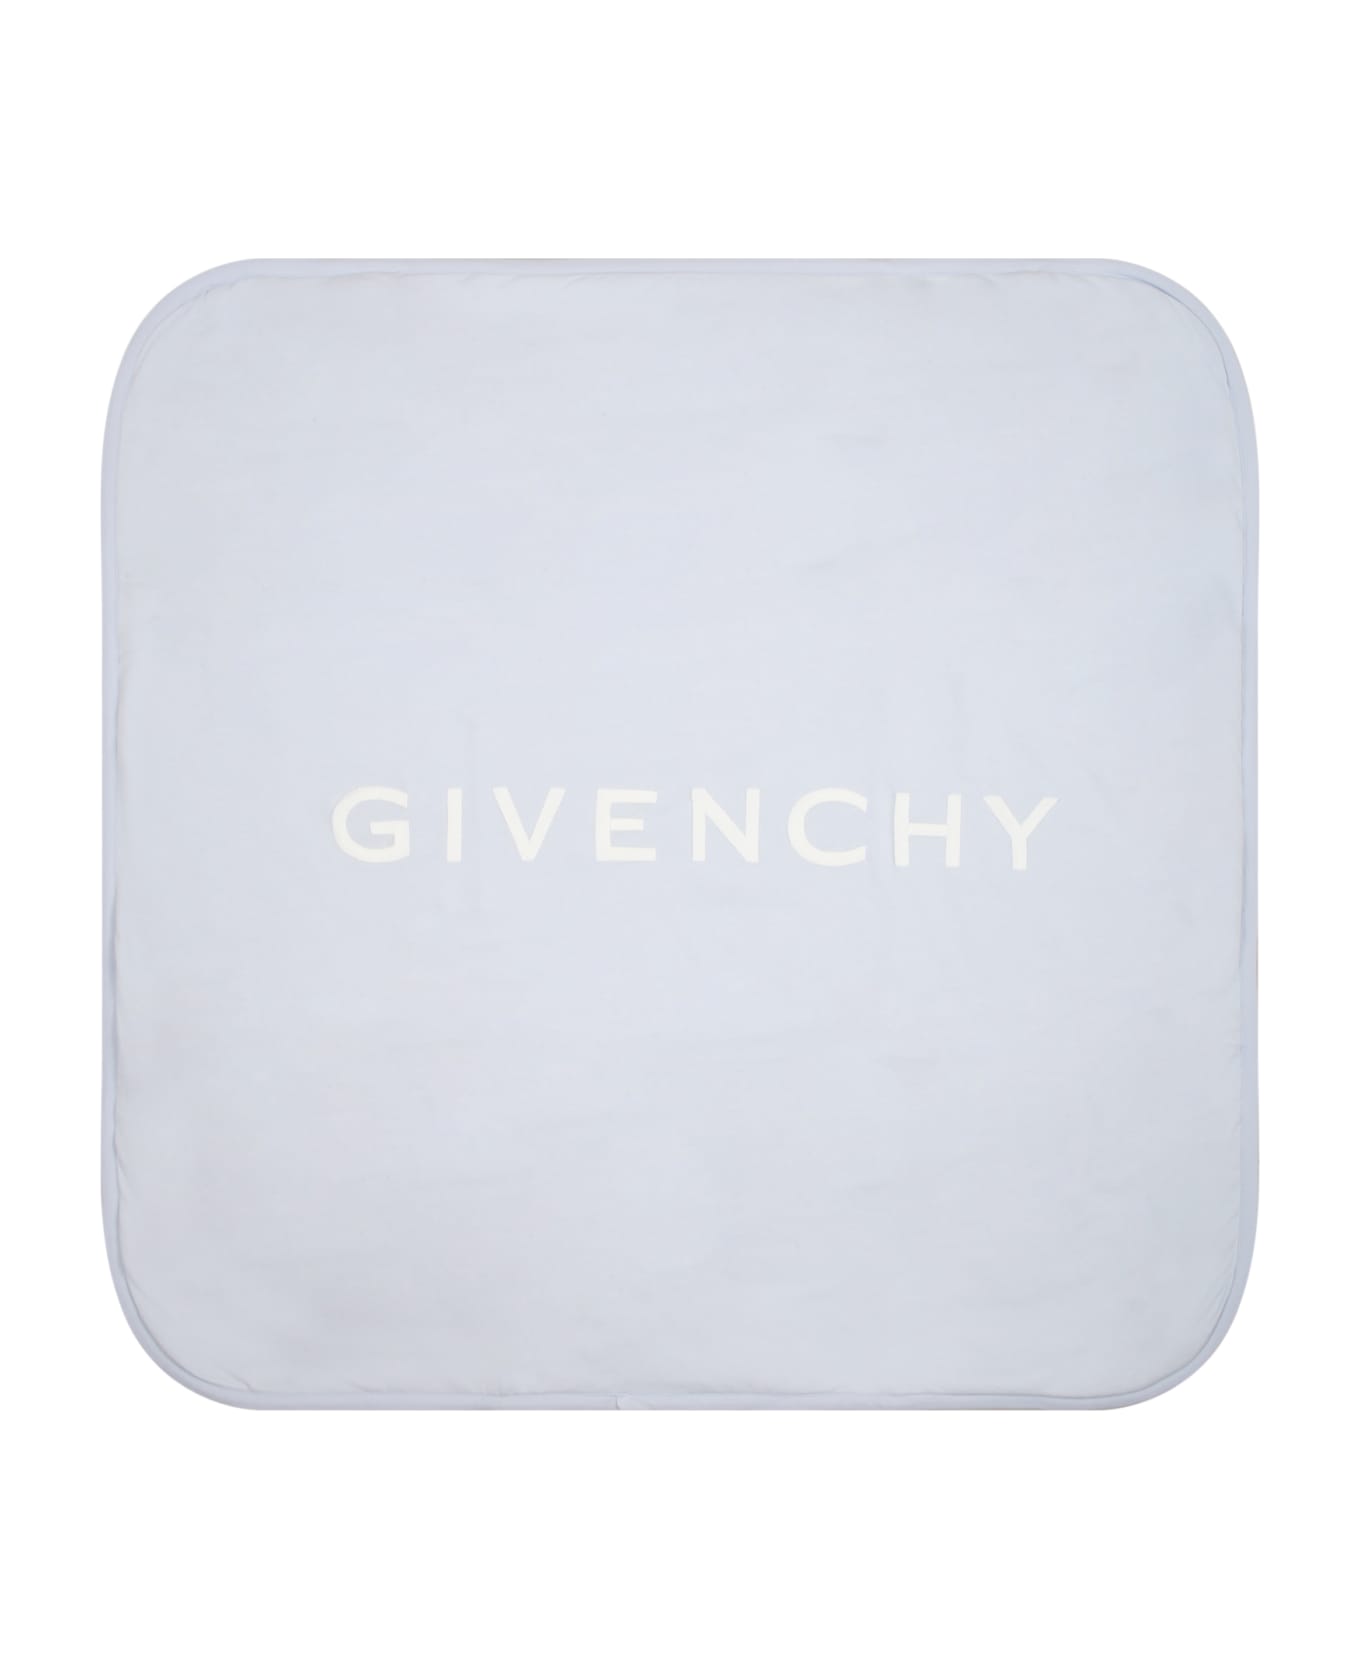 Givenchy Light Blue Blanket For Baby Boy With White Logo - Light Blue アクセサリー＆ギフト